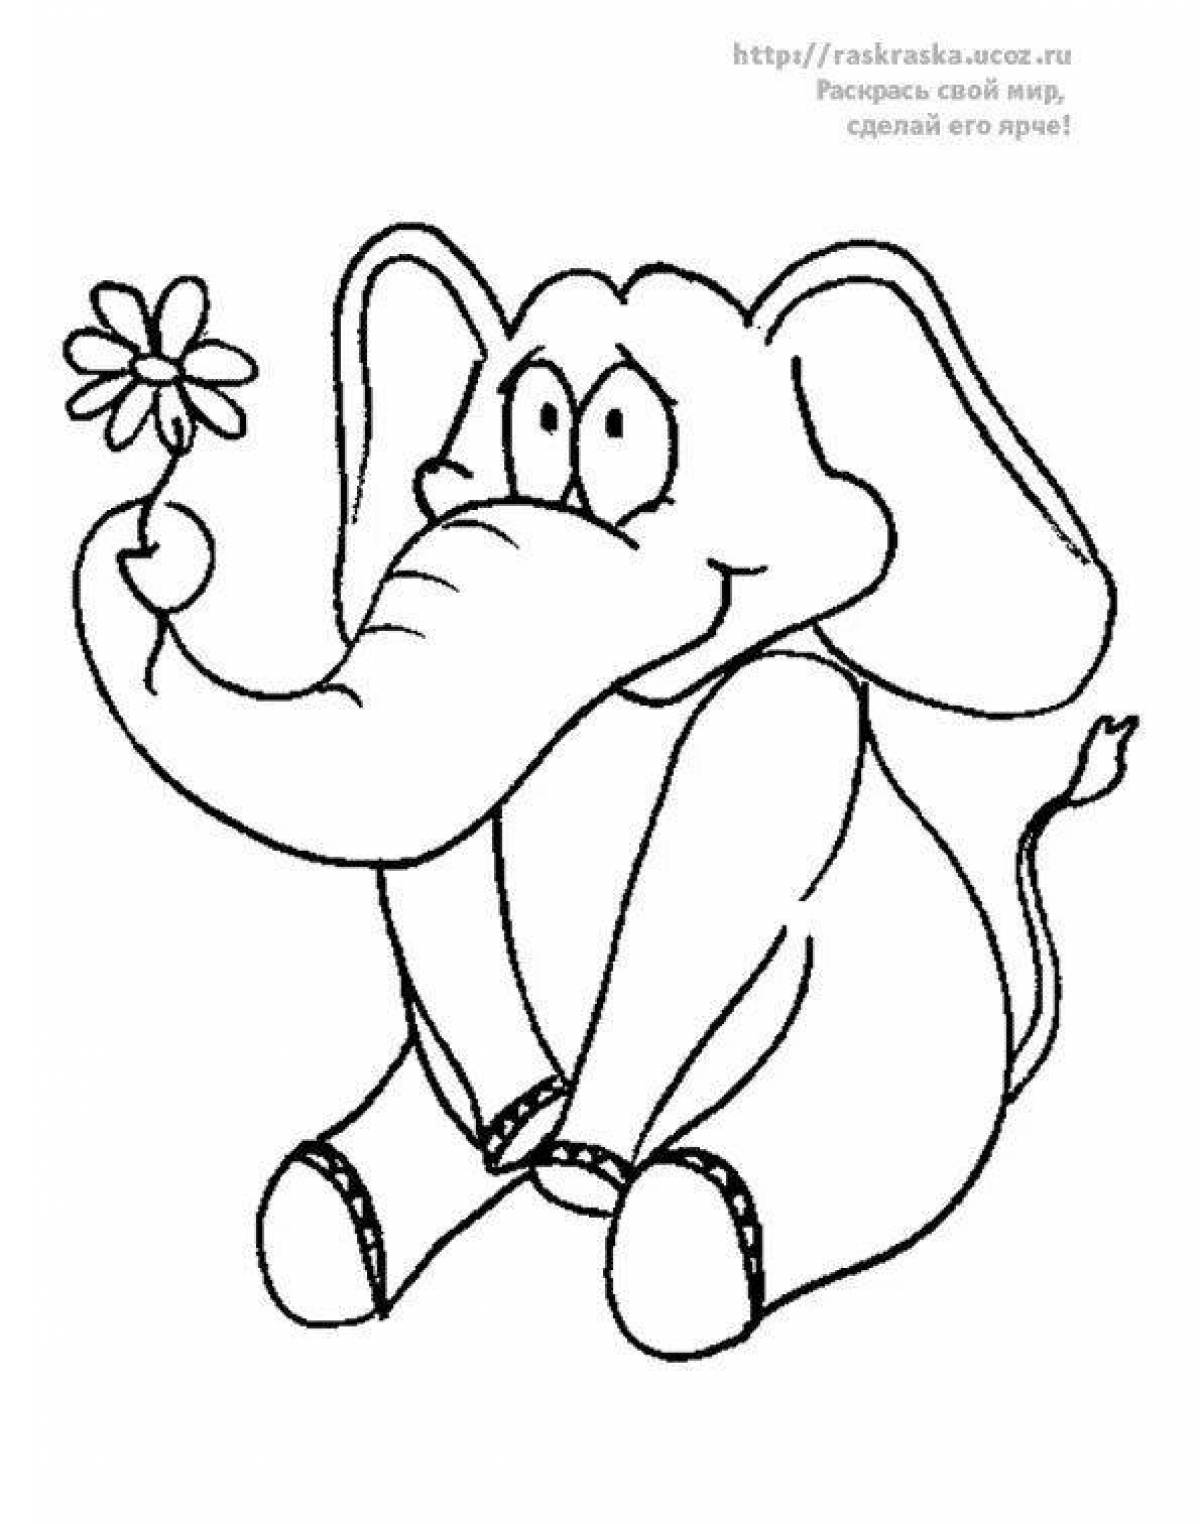 Exciting elephant and girl coloring book